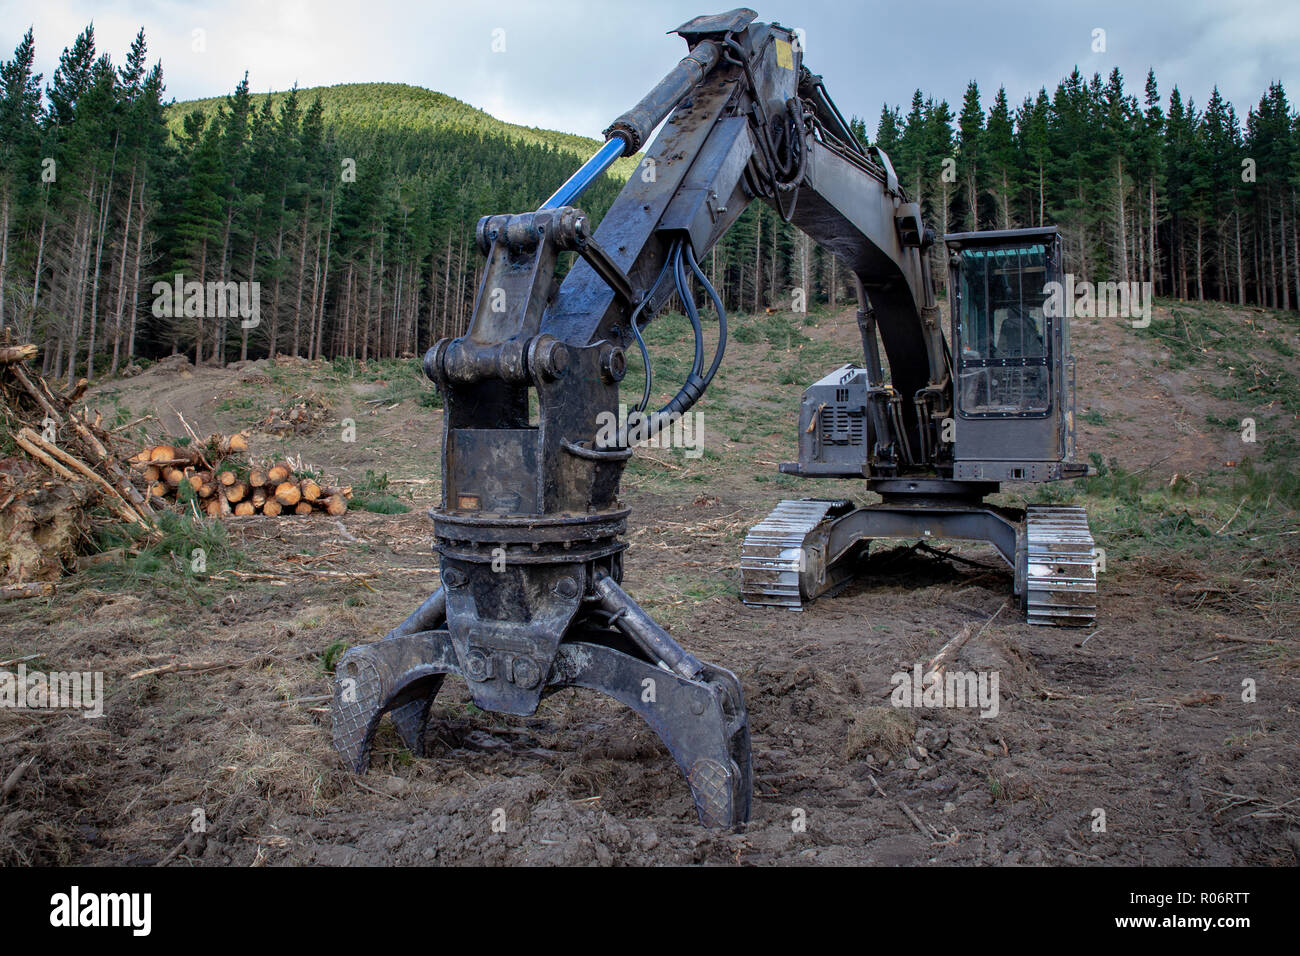 Logging machinery at a forestry logging site Stock Photo